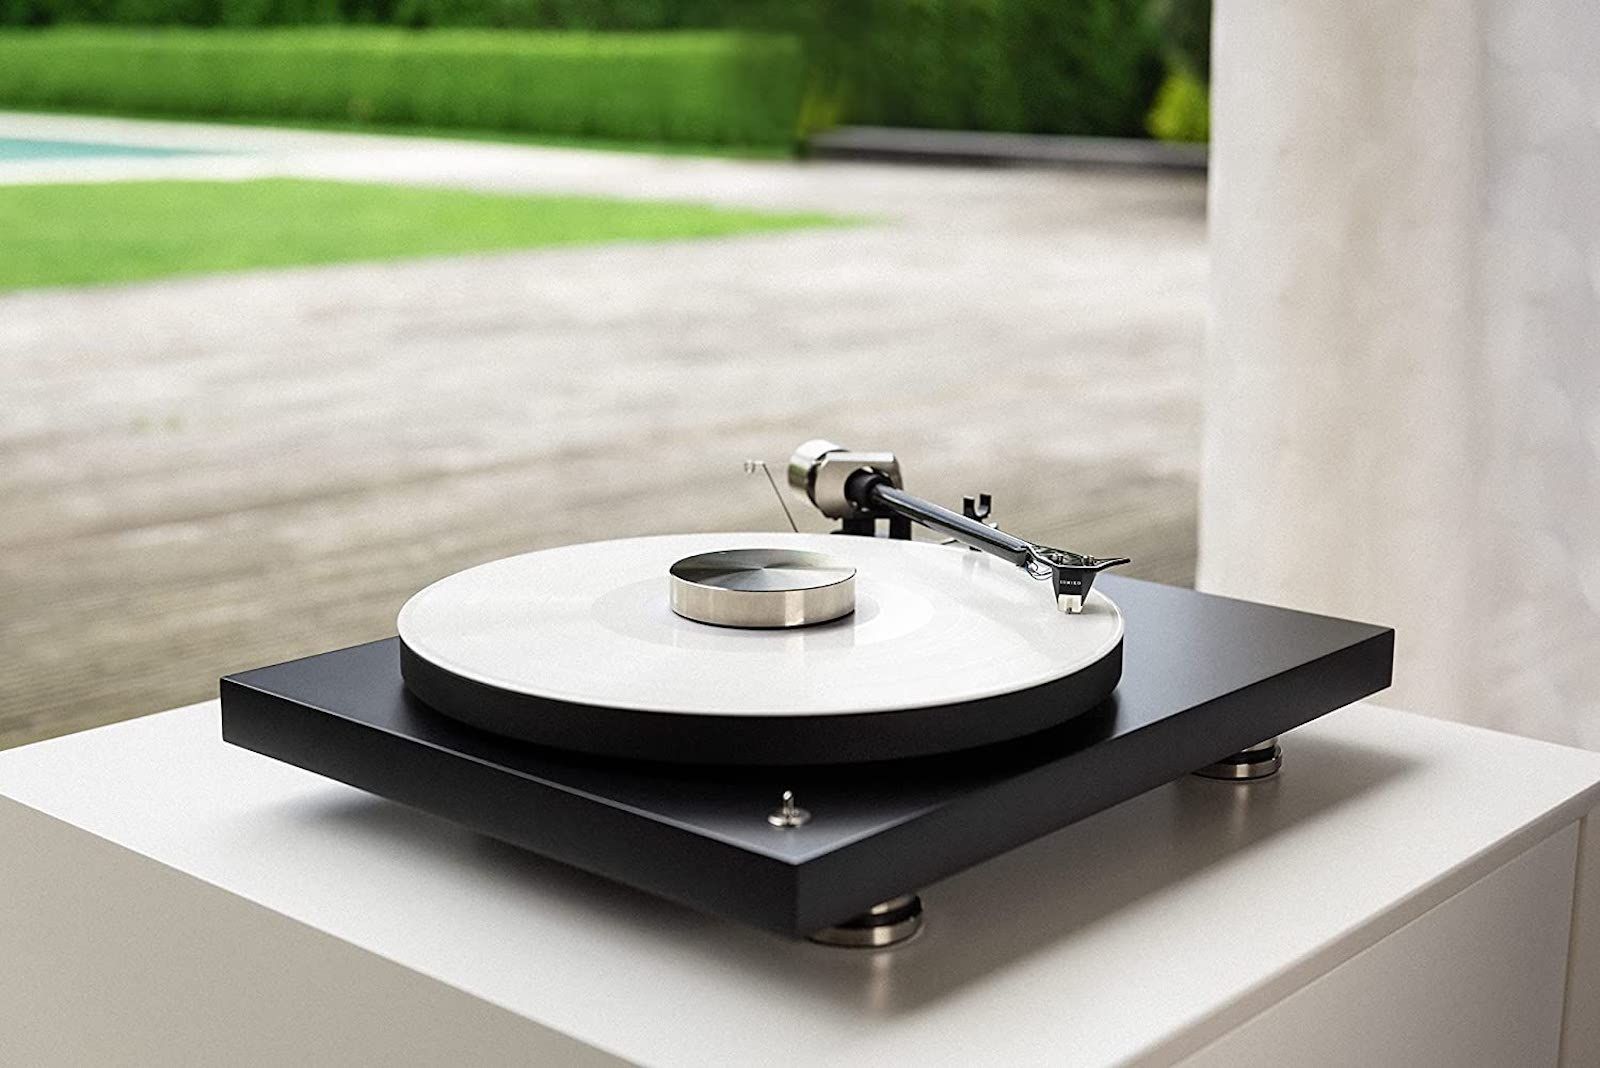 Best record player - Pro-Ject Debut Pro